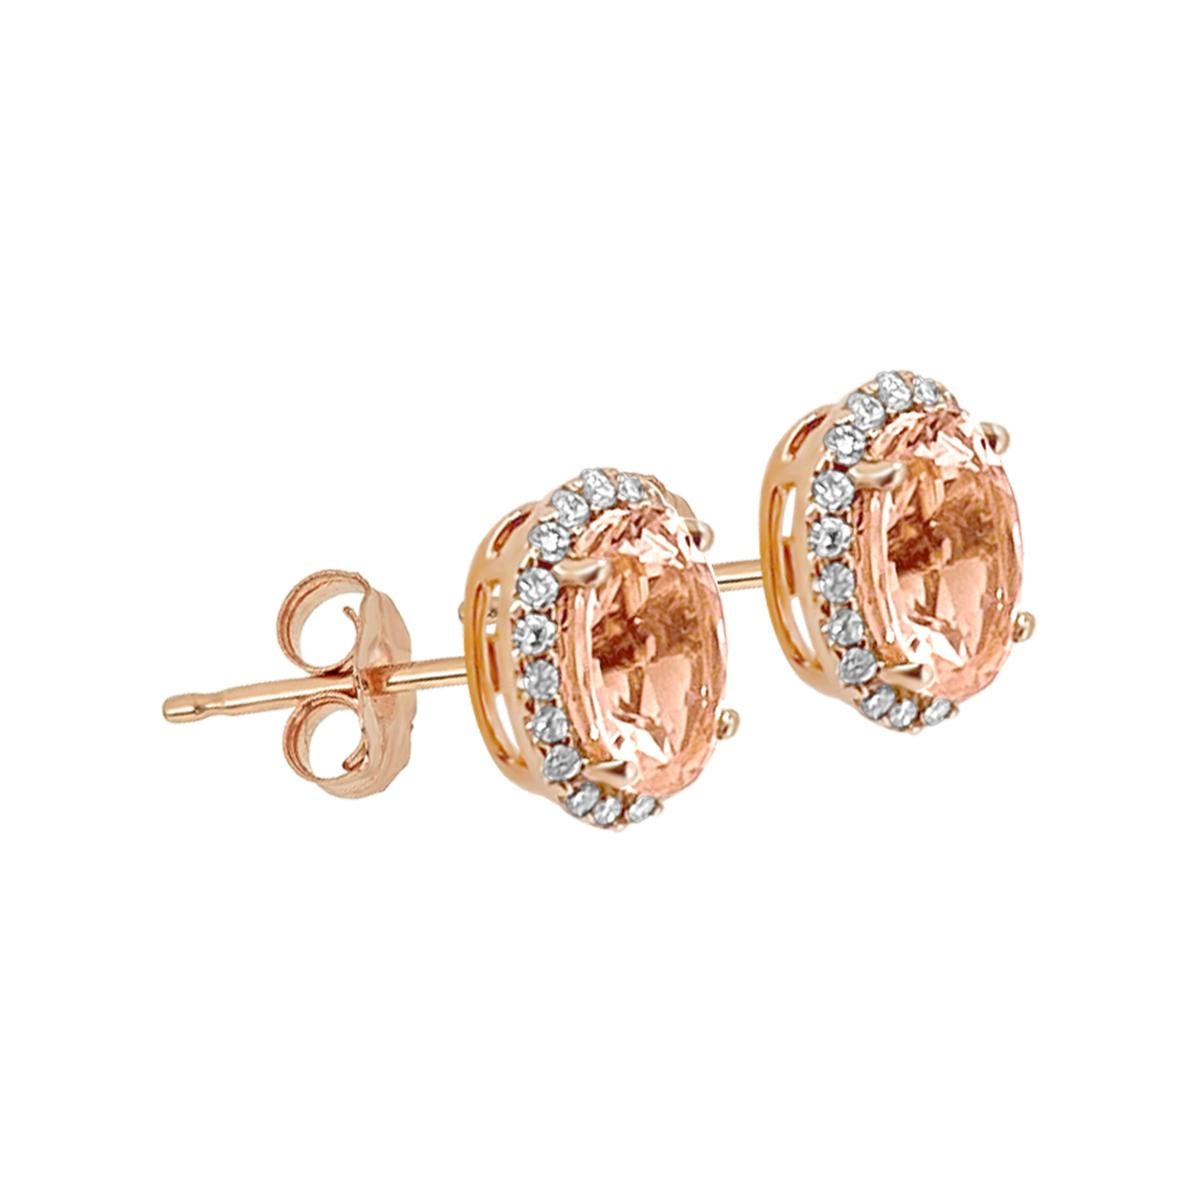 Stunning Pair Of Trendy Morganite Stud Earrings Crafted Of Solid 14K Rose Gold. This Brilliant Stud Earrings Features 8X6mm Sparkling Oval Cut Peach Morganite And Diamonds, All Come Together For A Remarkable Piece Of Jewelry.

Style#